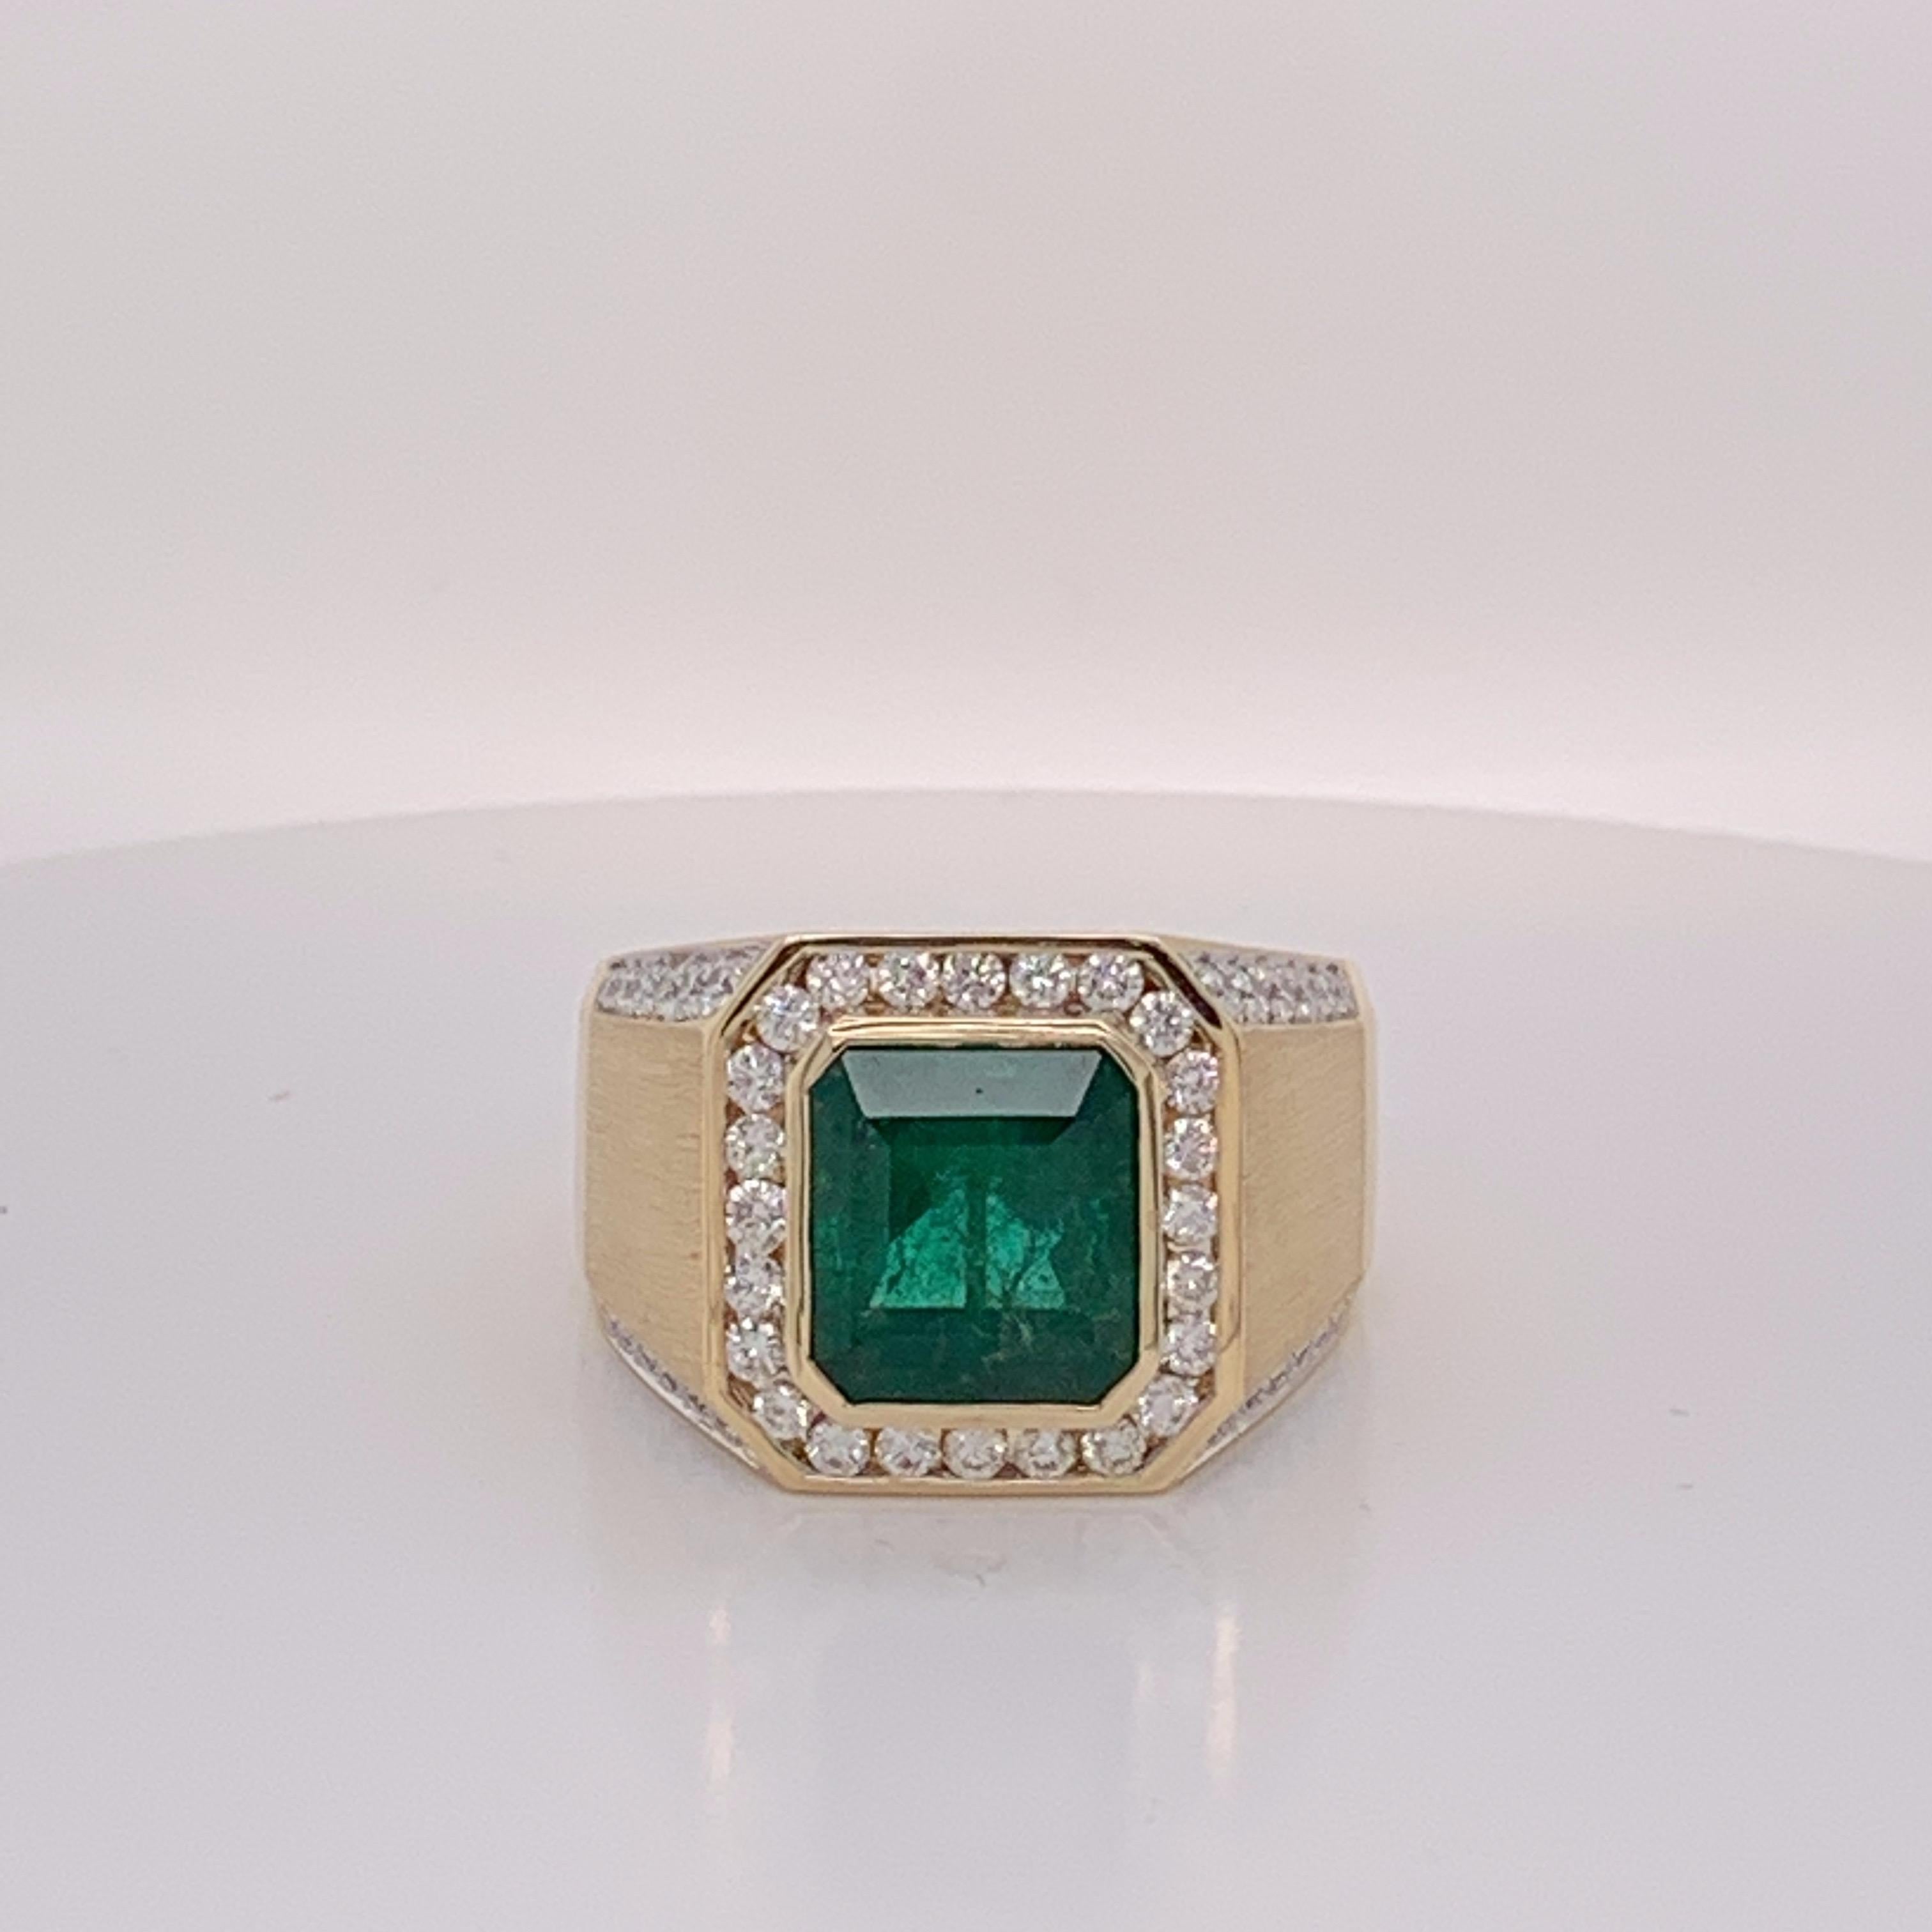 Natural Octagon 5.14 Carat  Emerald and 1.18 carat round  white Diamond  set in 14 Karat Gold is one of a kind Hand crafted Mens ring . This is heavy mount and custom designed Ring . The size is 12 but can be resized if needed.

If you need any